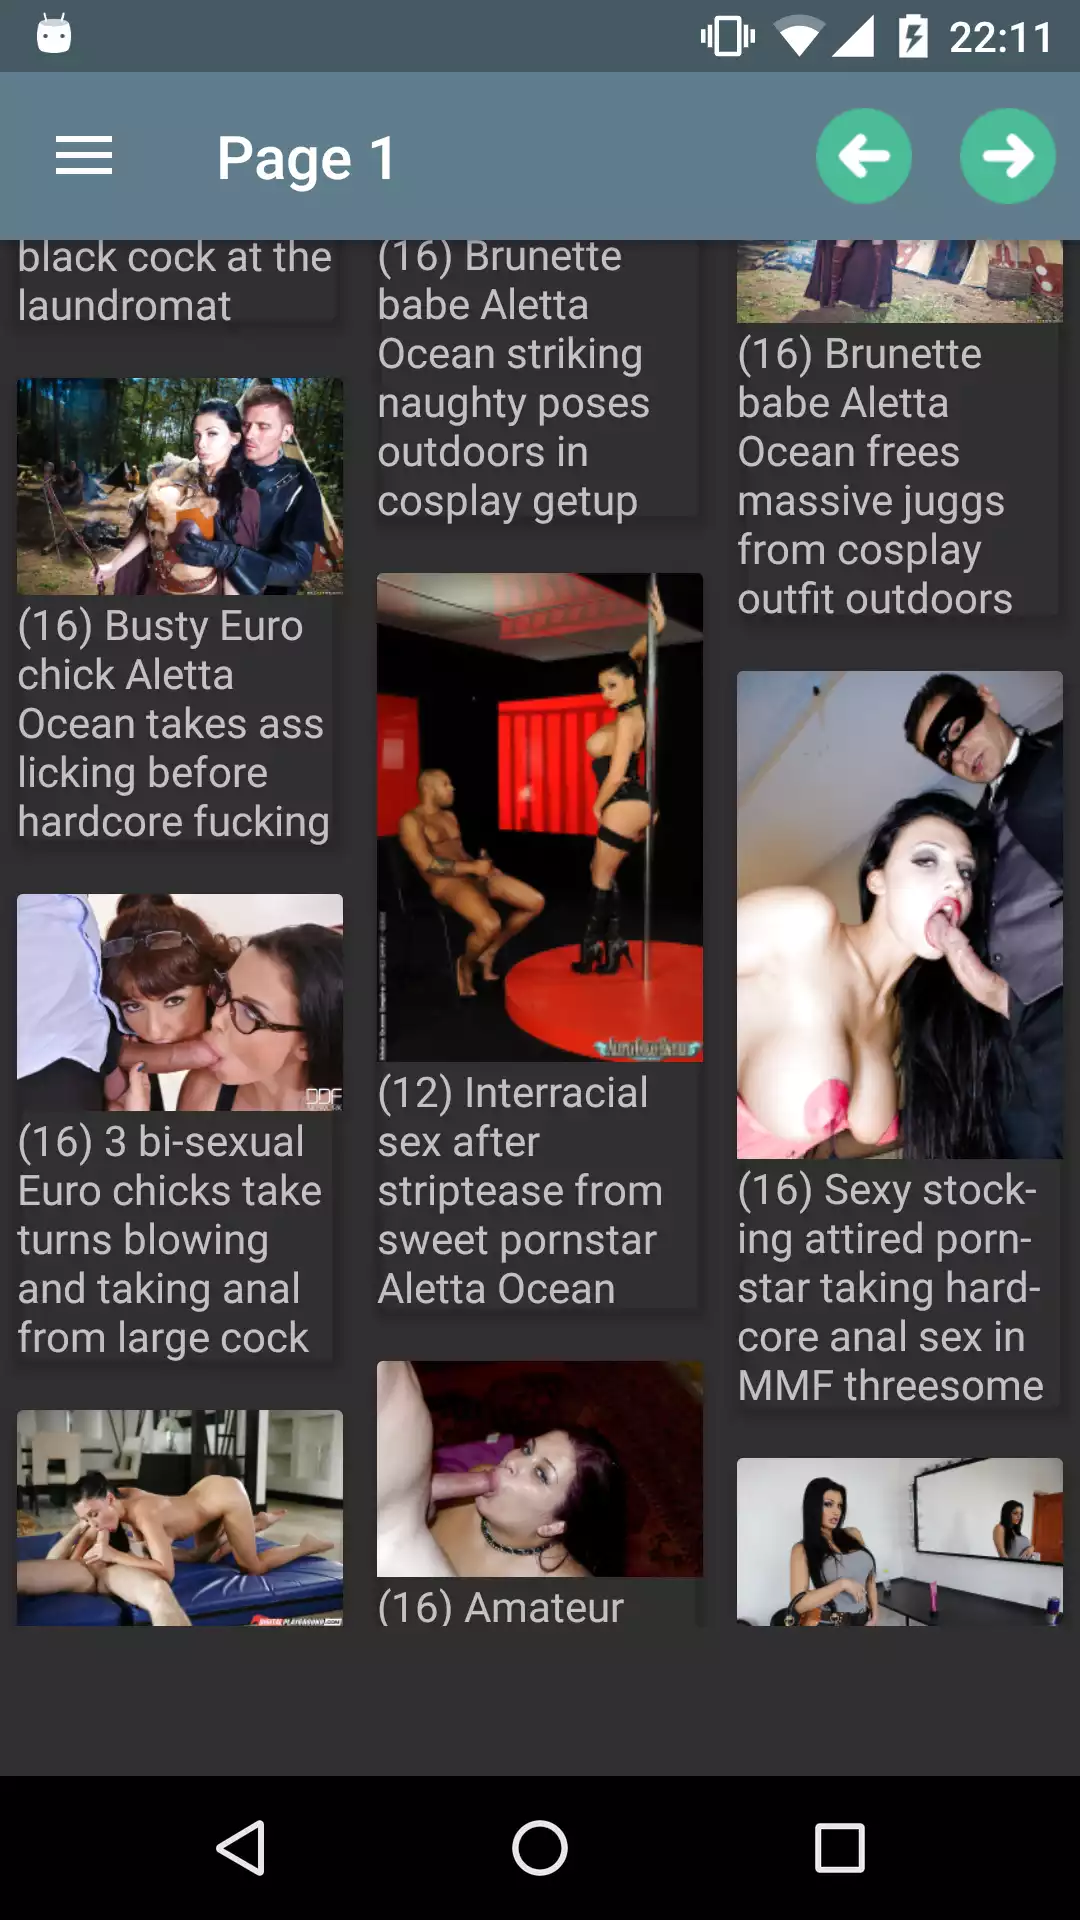 Aletta Ocean galleries porn,galleries,sexy,star,femboy,best,adult,hot,android,pic,download,sex,pornstar,shemale,wallpaper,apps,photos,aletta,pictures,ocean,girls,hentai,apk,photo,images,app,image